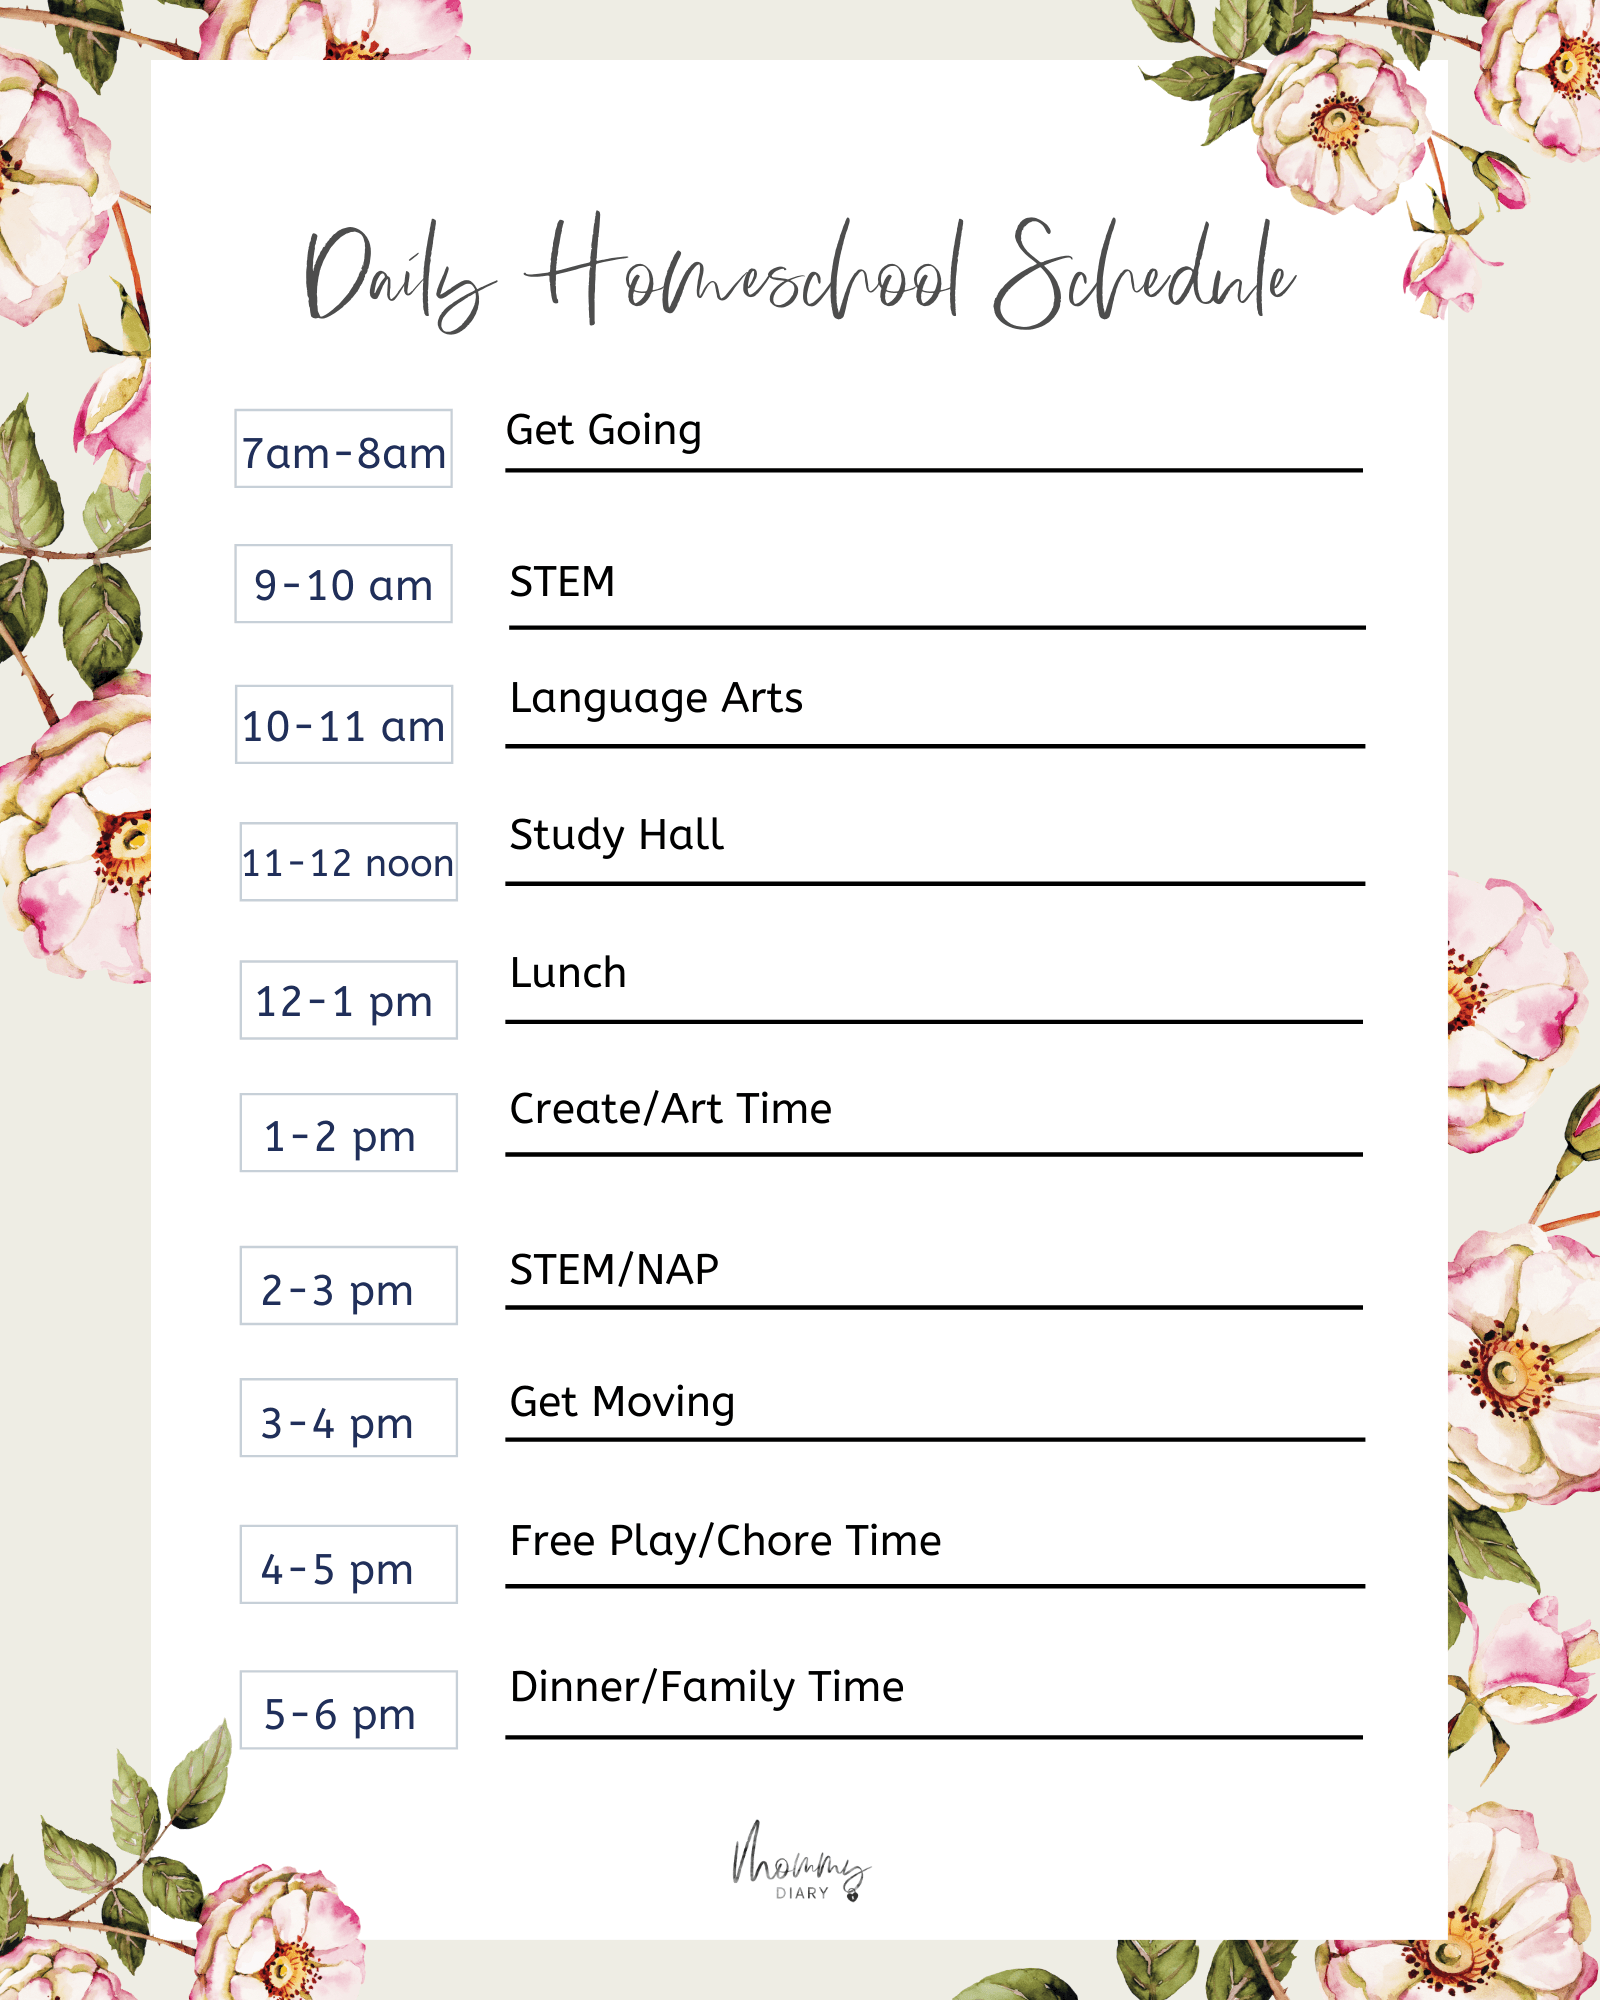 Daily homeschool schedule template from Mommy Diary